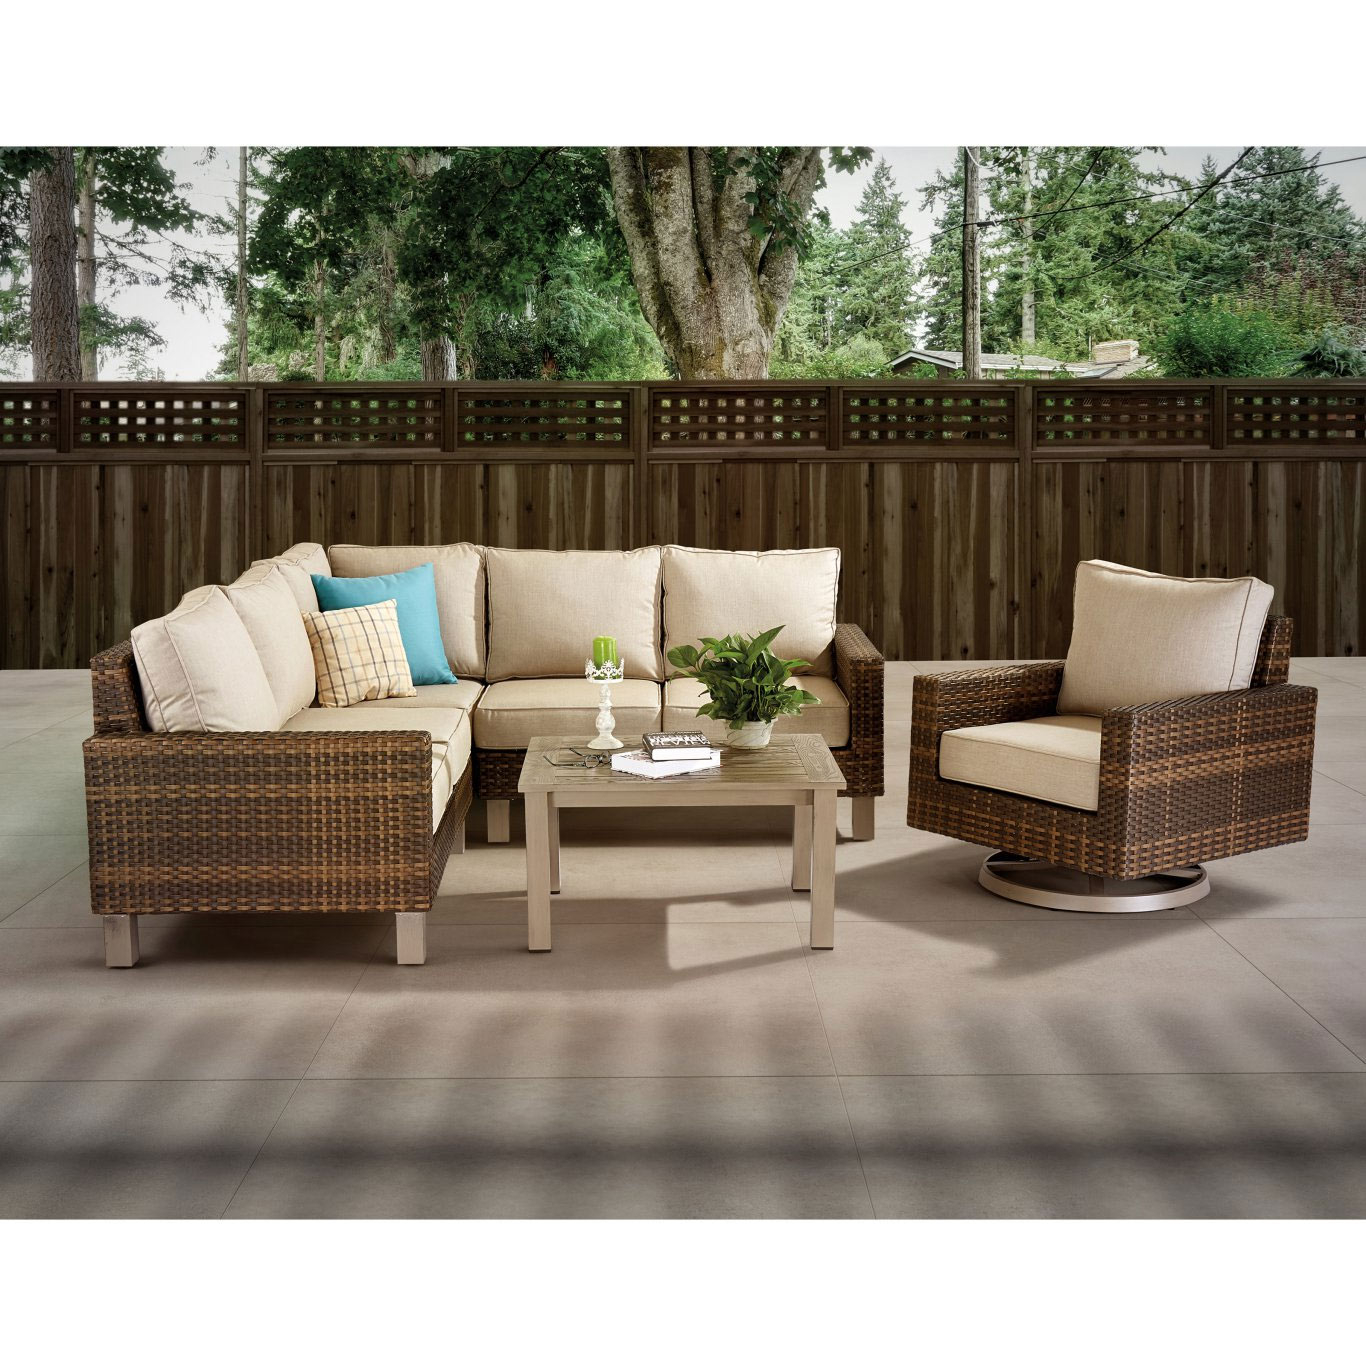 Woodard Tahoe Wicker 5pc Deep Seating Bishops Centre intended for dimensions 1366 X 1366